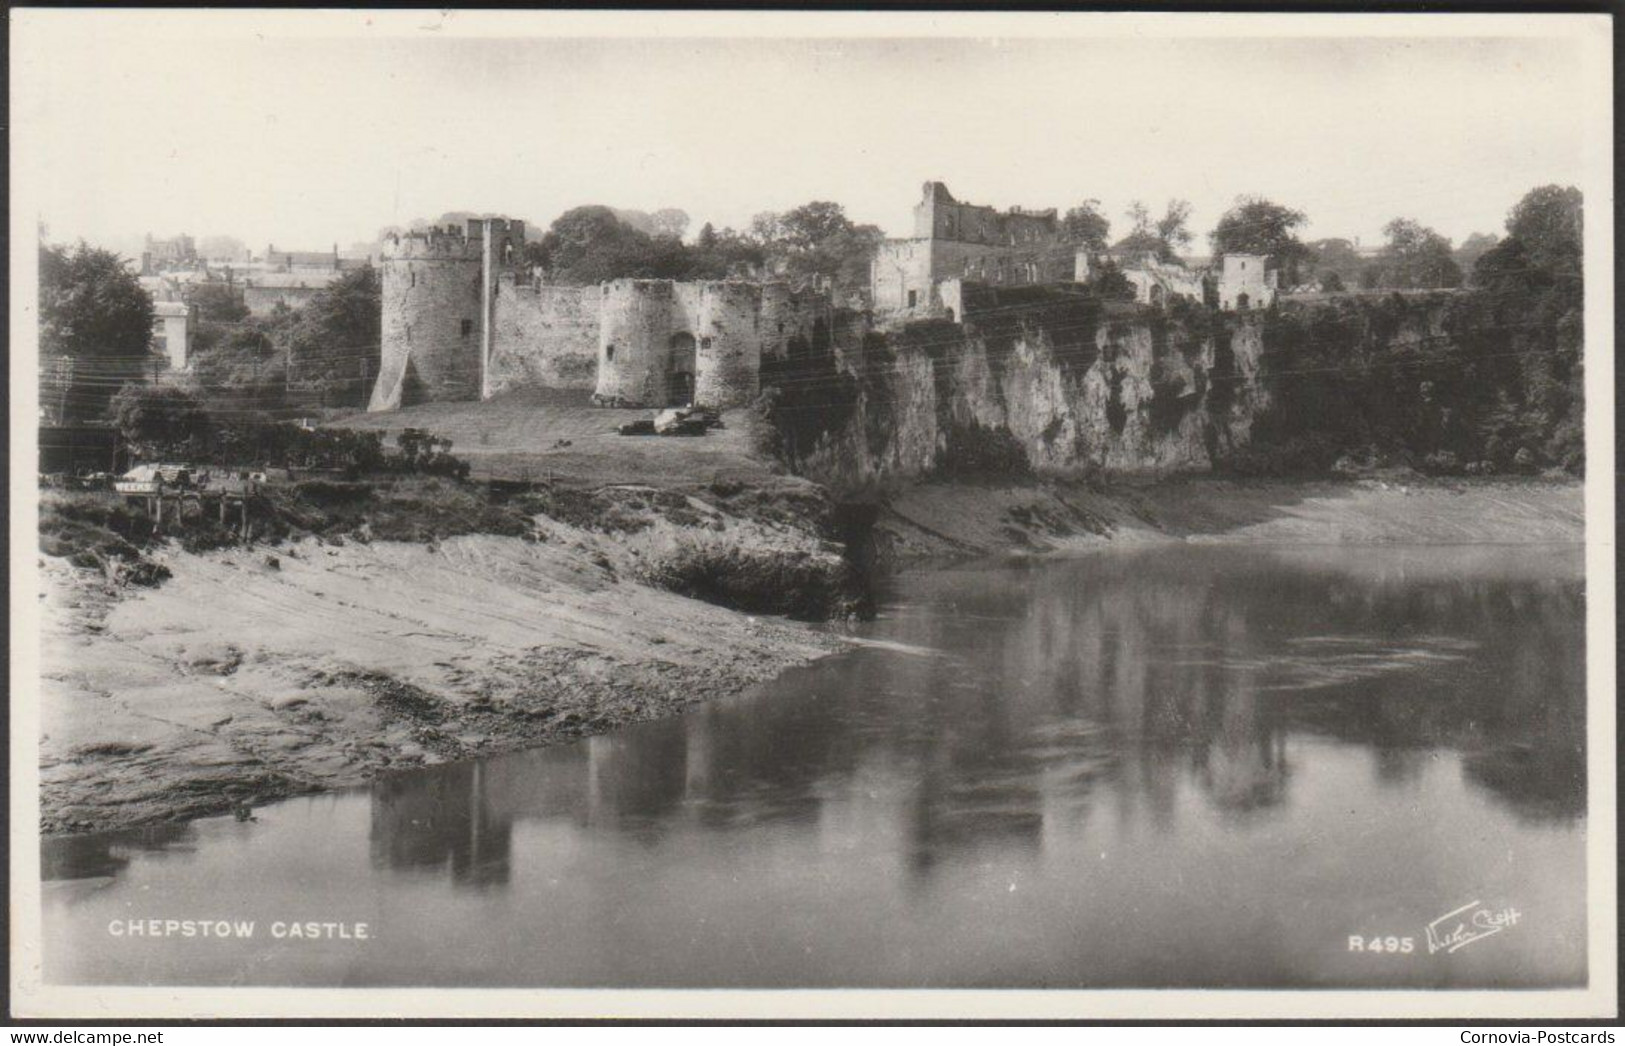 Chepstow Castle, Monmouthshire, C.1930 - Walter Scott RP Postcard - Monmouthshire